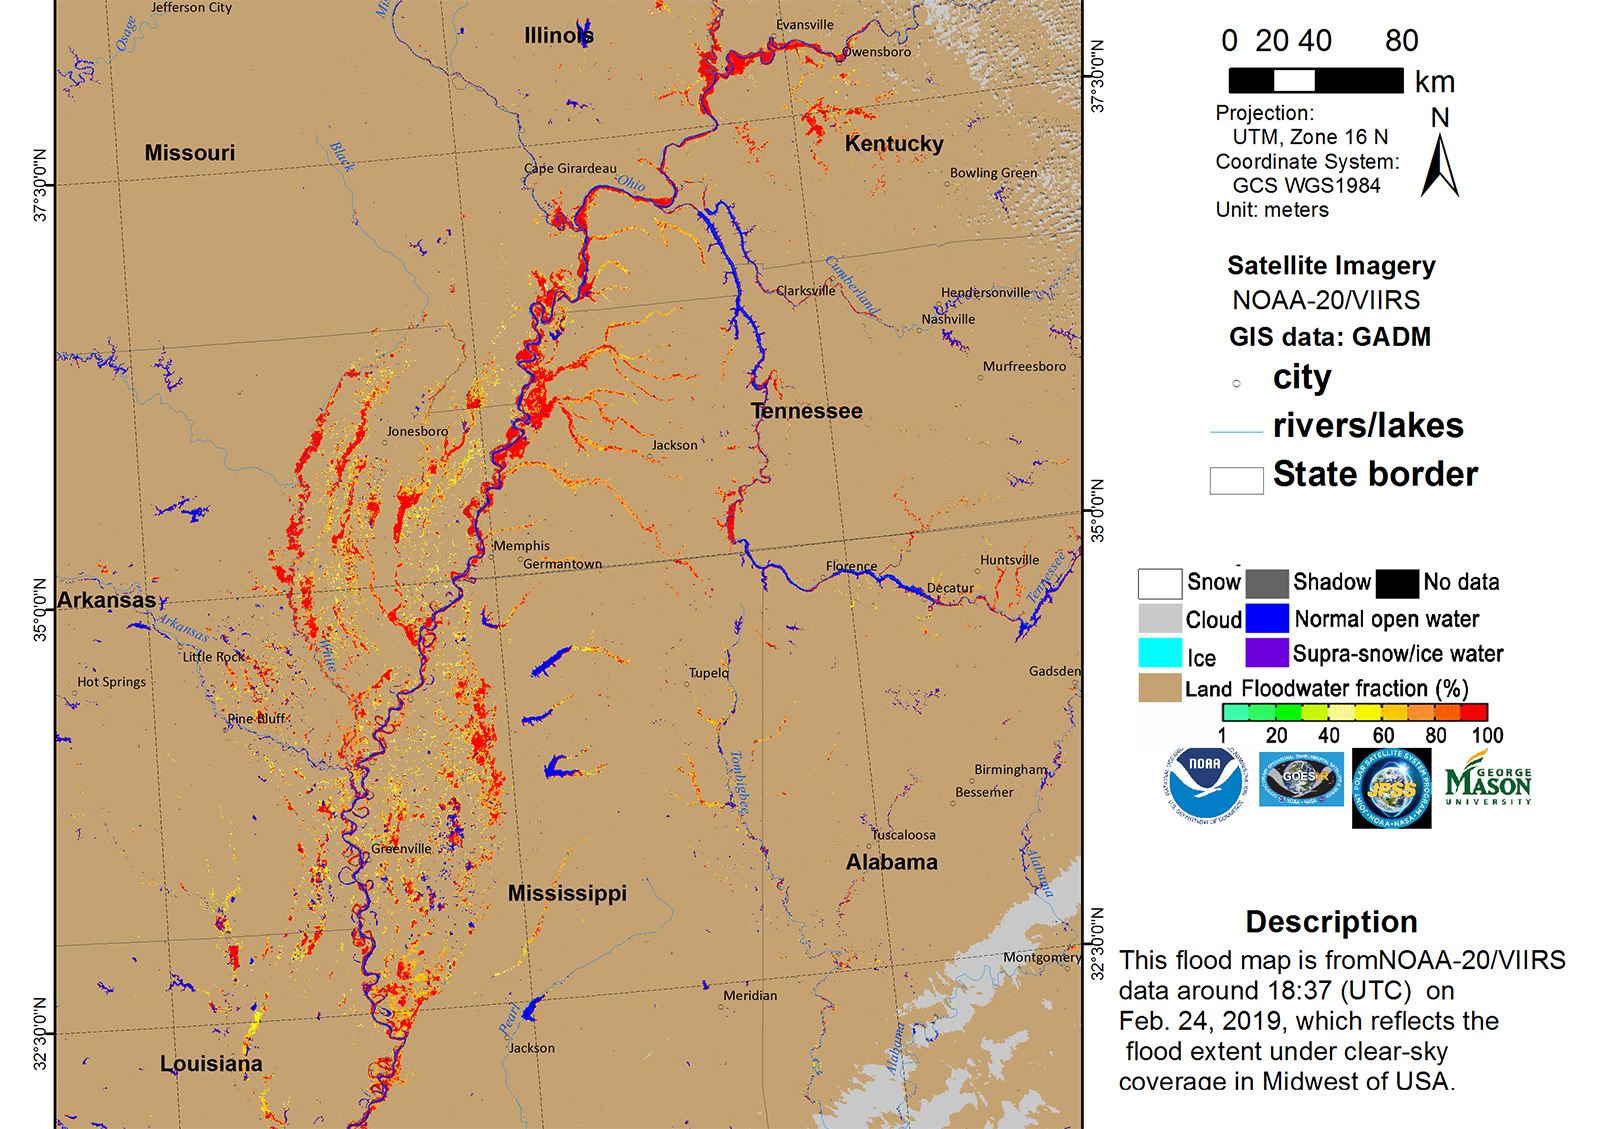 A map graphic shows the lower Mississippi River, with the normal water levels indicated in blue and flood waters, along the entire extent of the river, indicated in red.